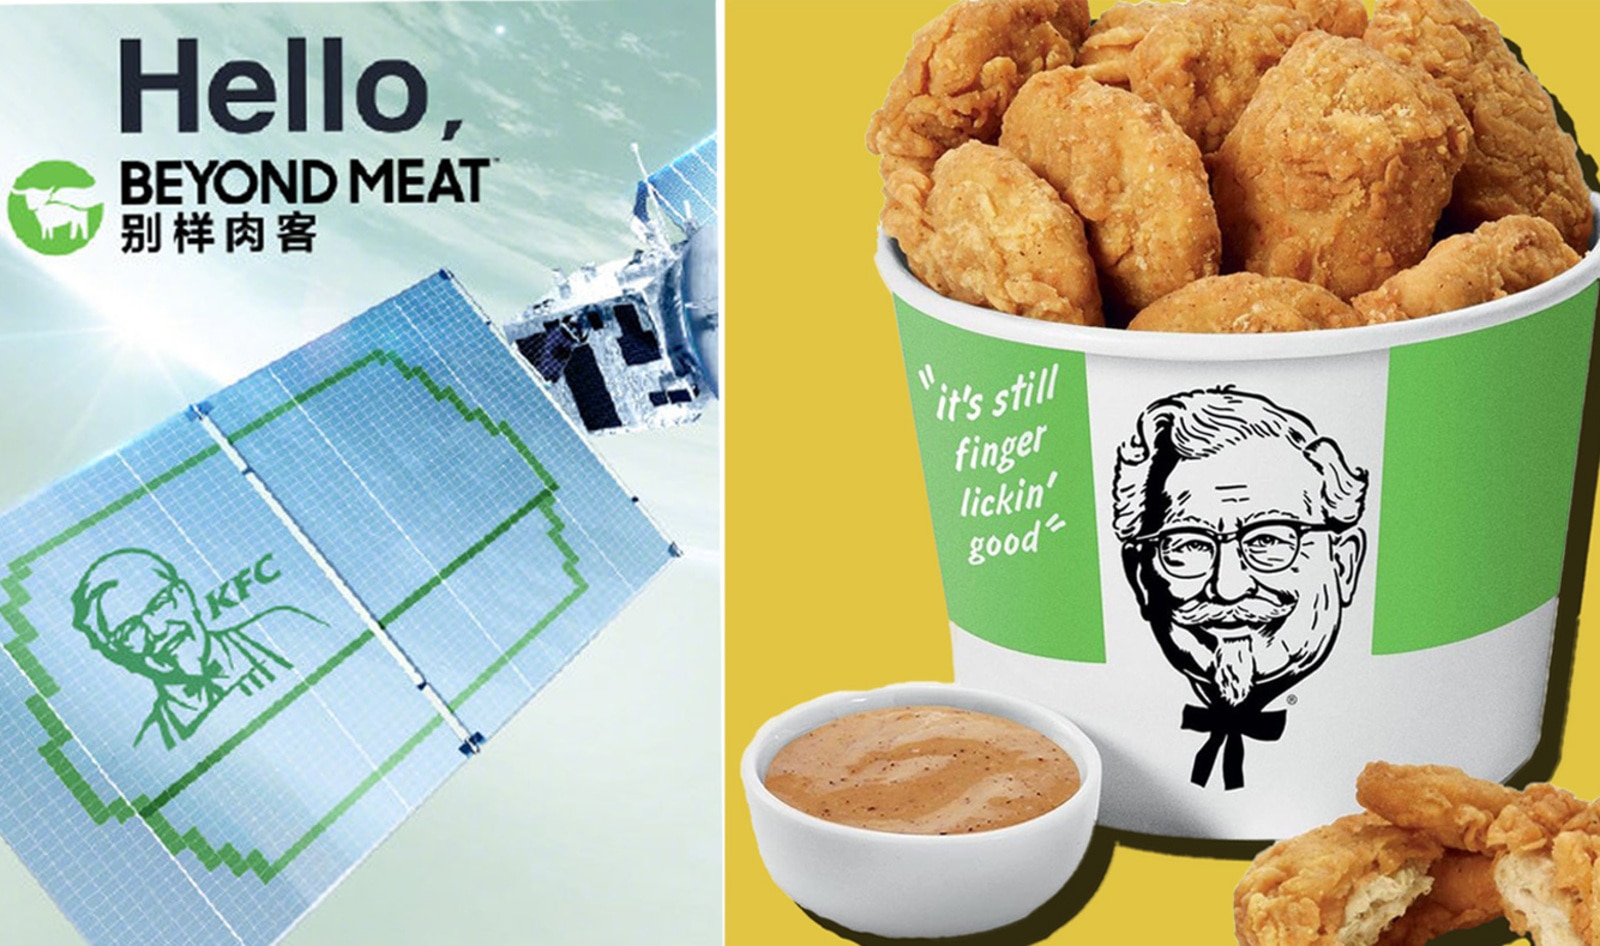 KFC Teases Launch of Beyond Meat Vegan Options in China